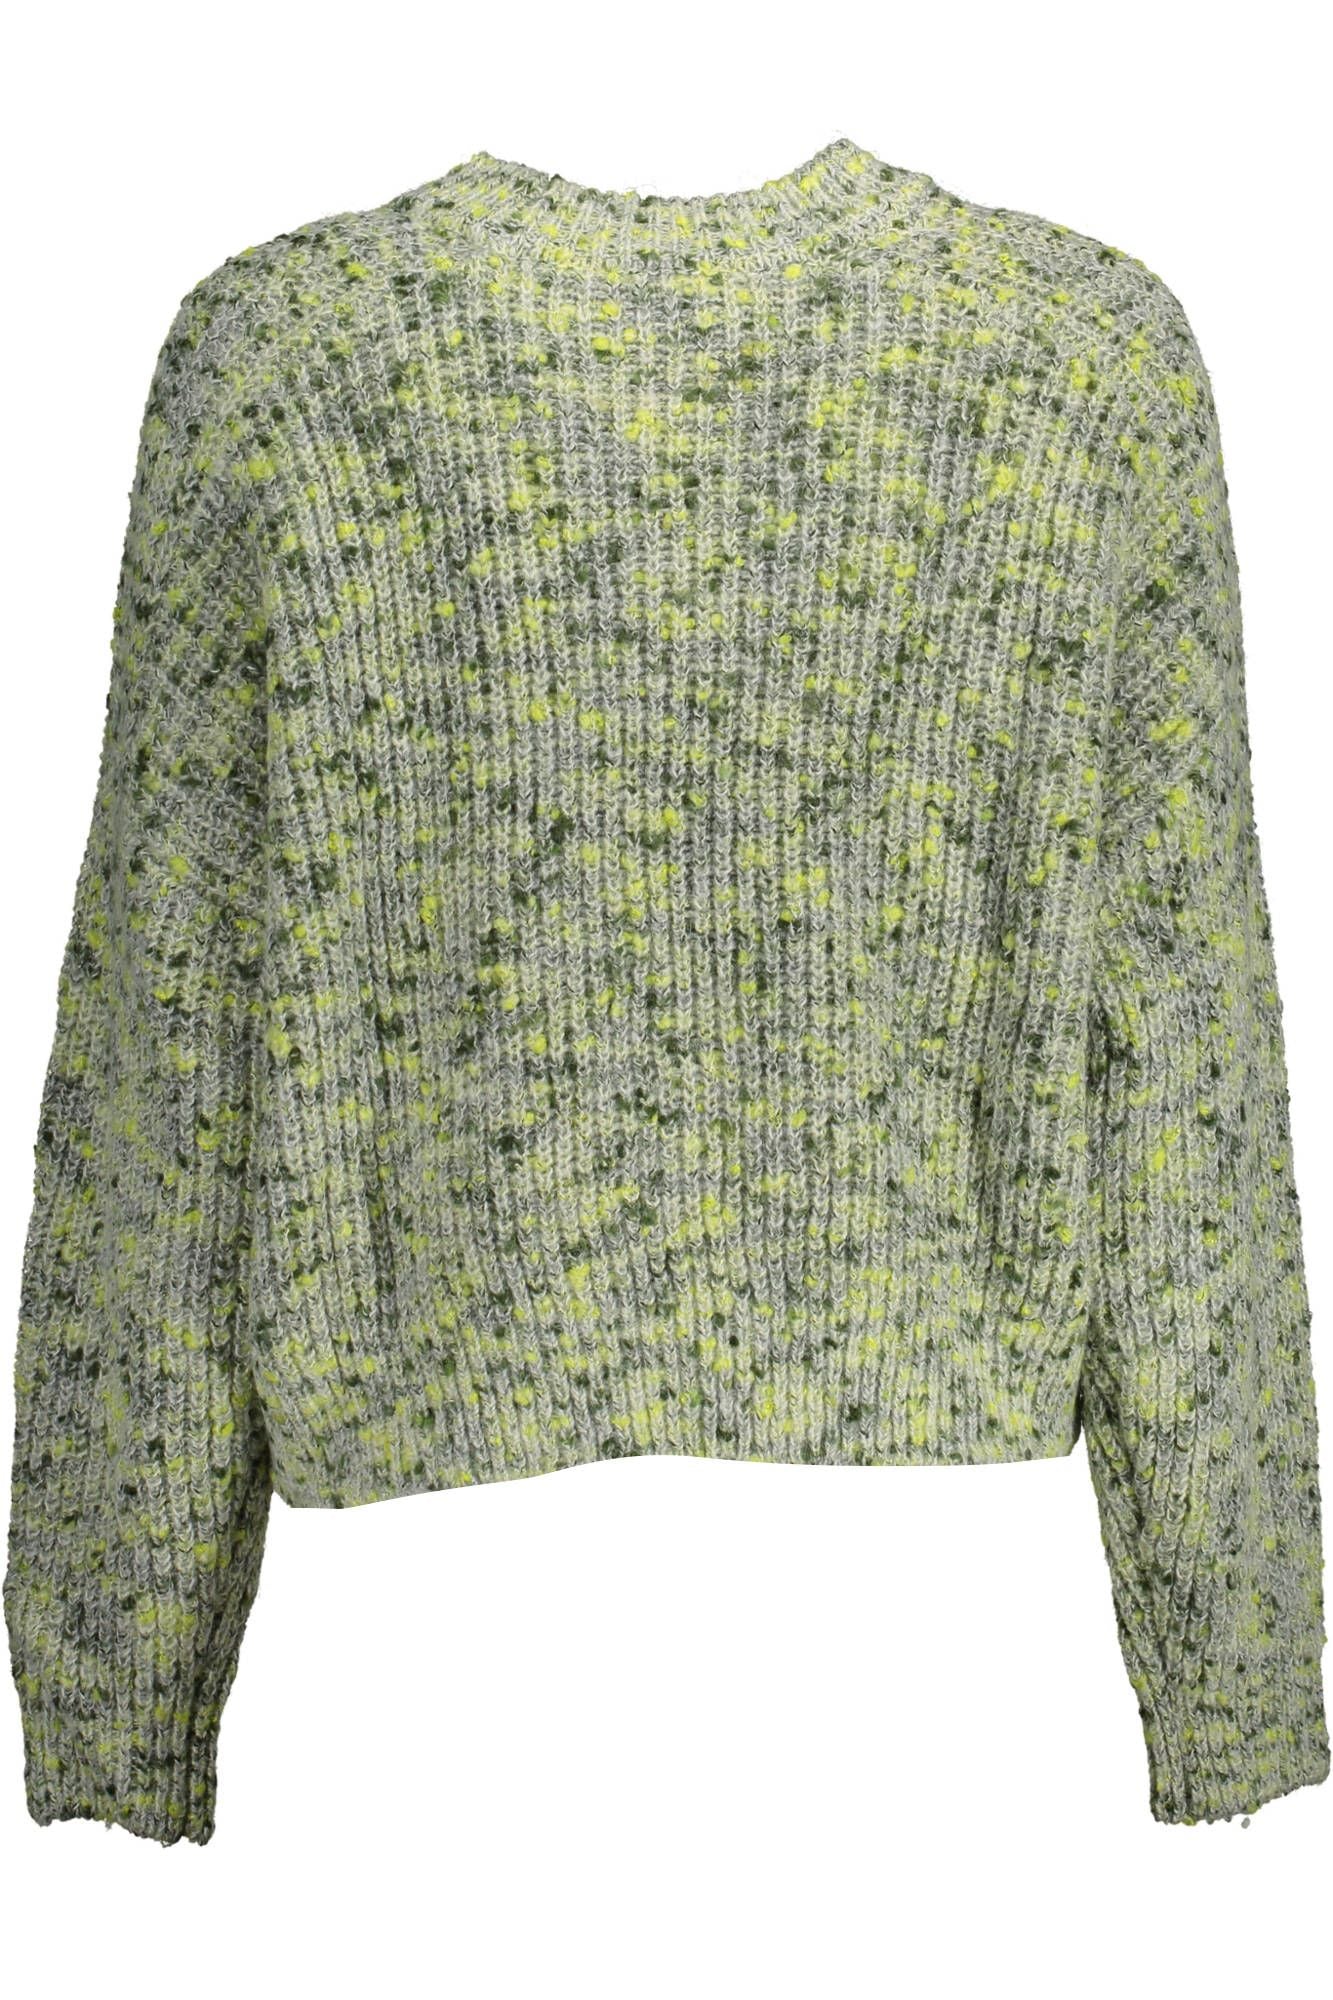 Desigual Green Embroidered Sweater with Contrasting Accents